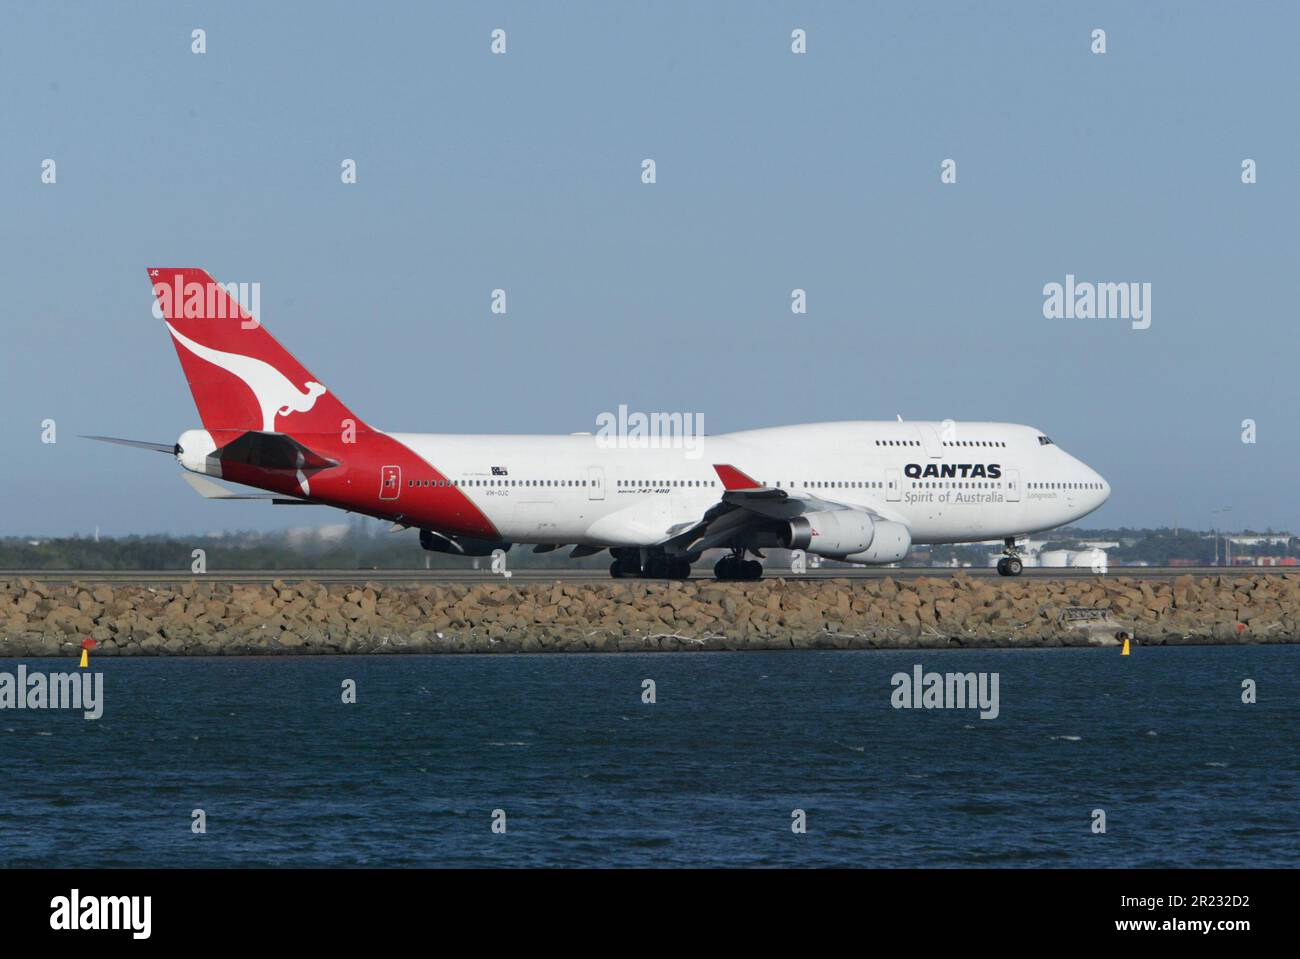 Aircraft and aircraft movements at Sydney (Kingsford Smith) Airport on Botany Bay in Sydney, Australia. Stock Photo